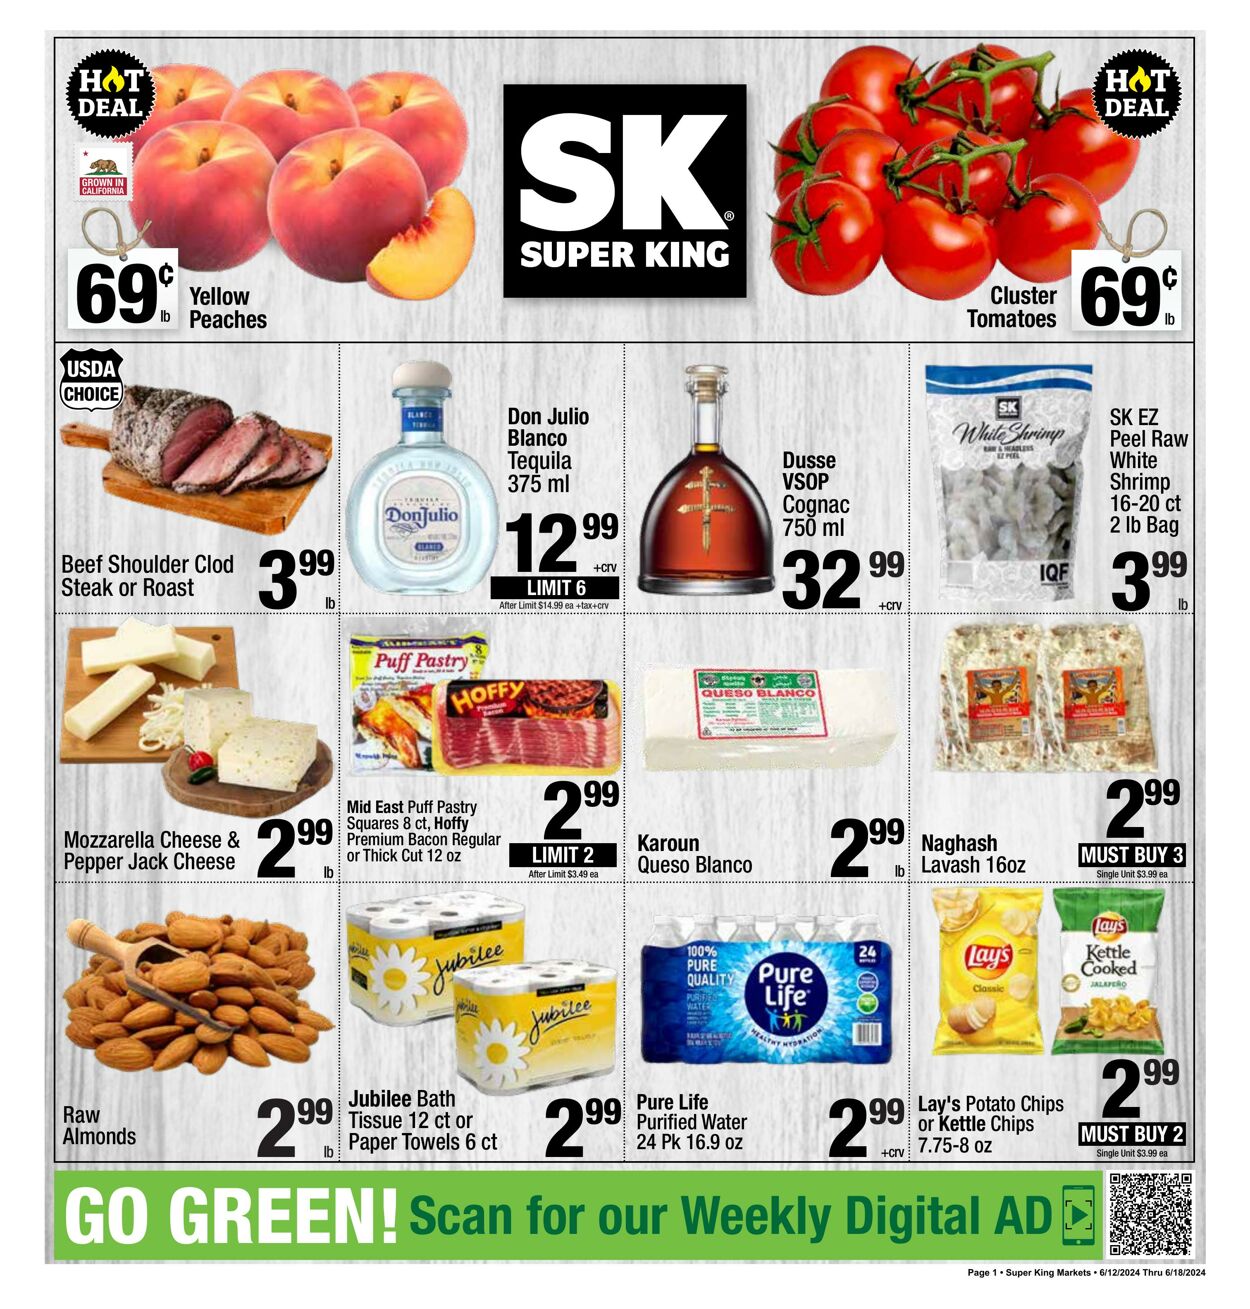 Super King Markets Promotional weekly ads